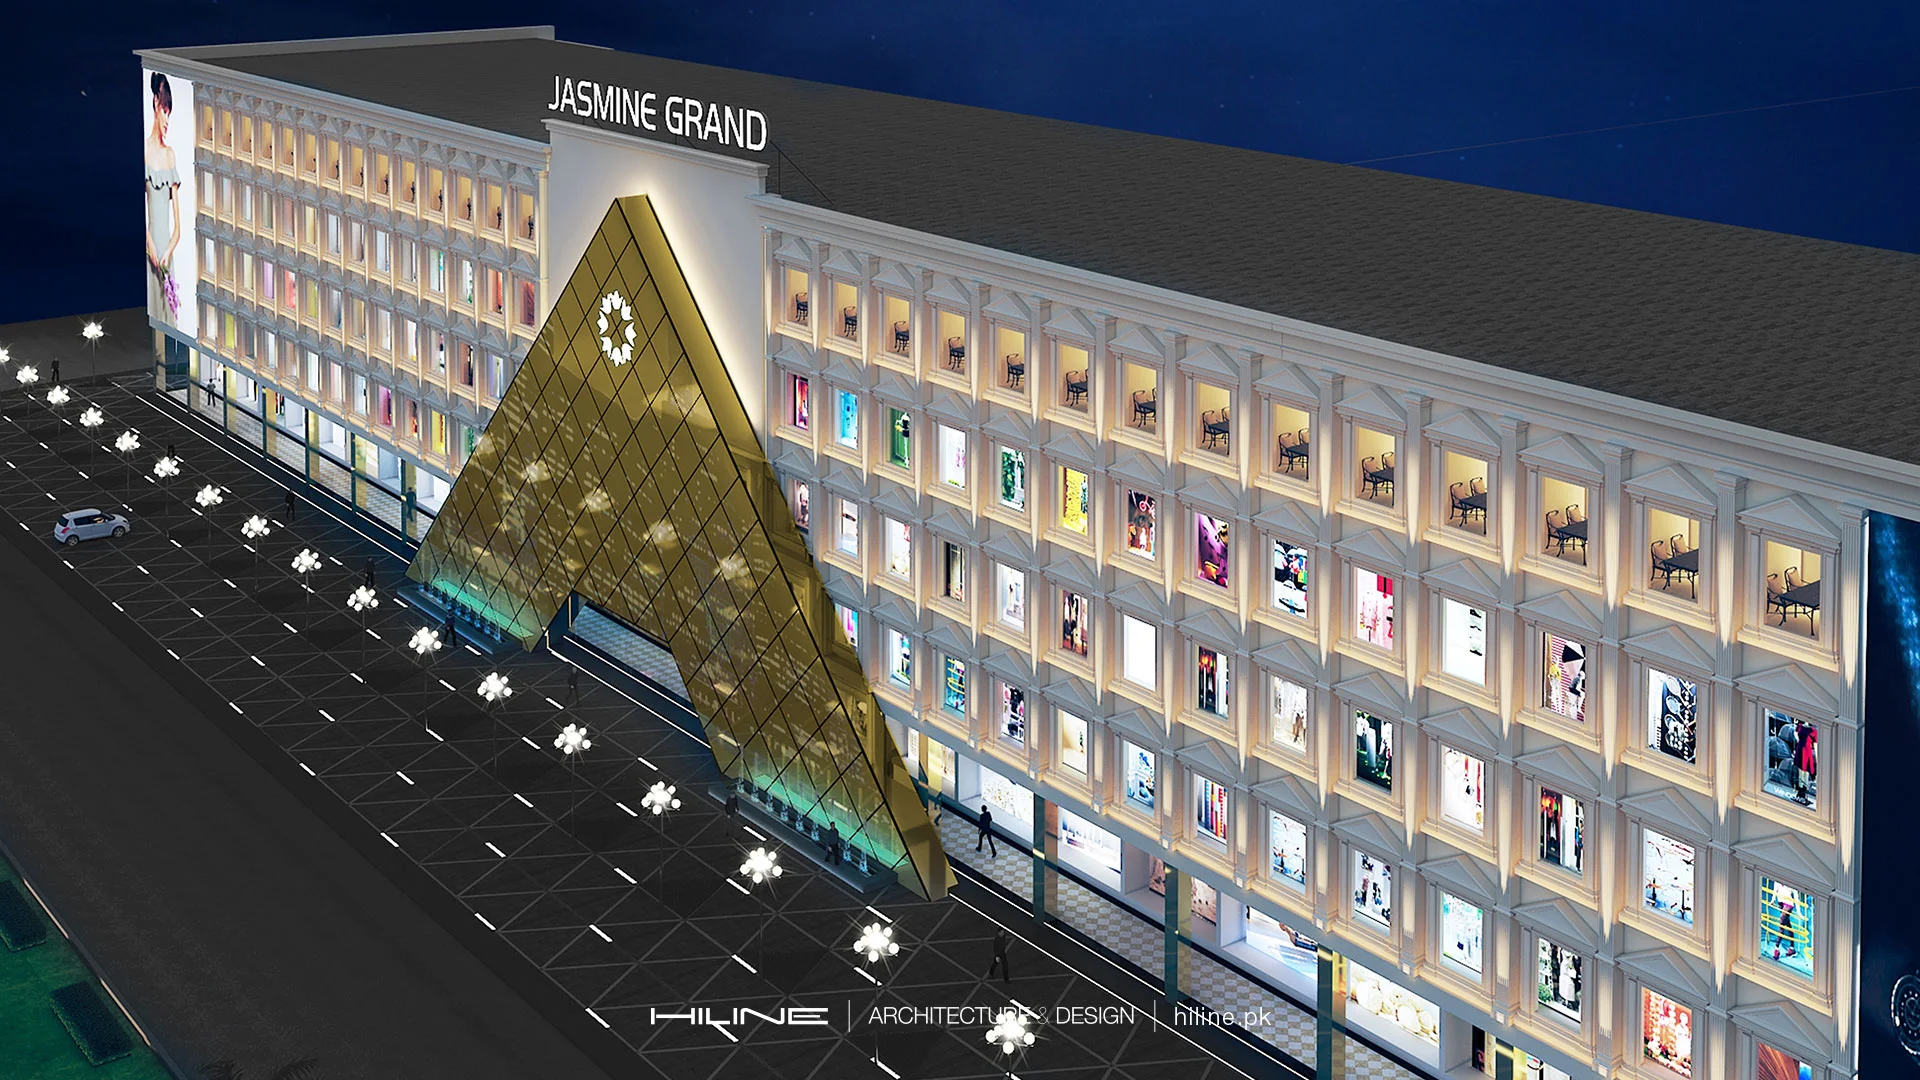 Jasmine-Grand-Mall-by-hiline-architects-interior-designer-3d-visualization-restaurant-commercial-building-design-Lahore-03